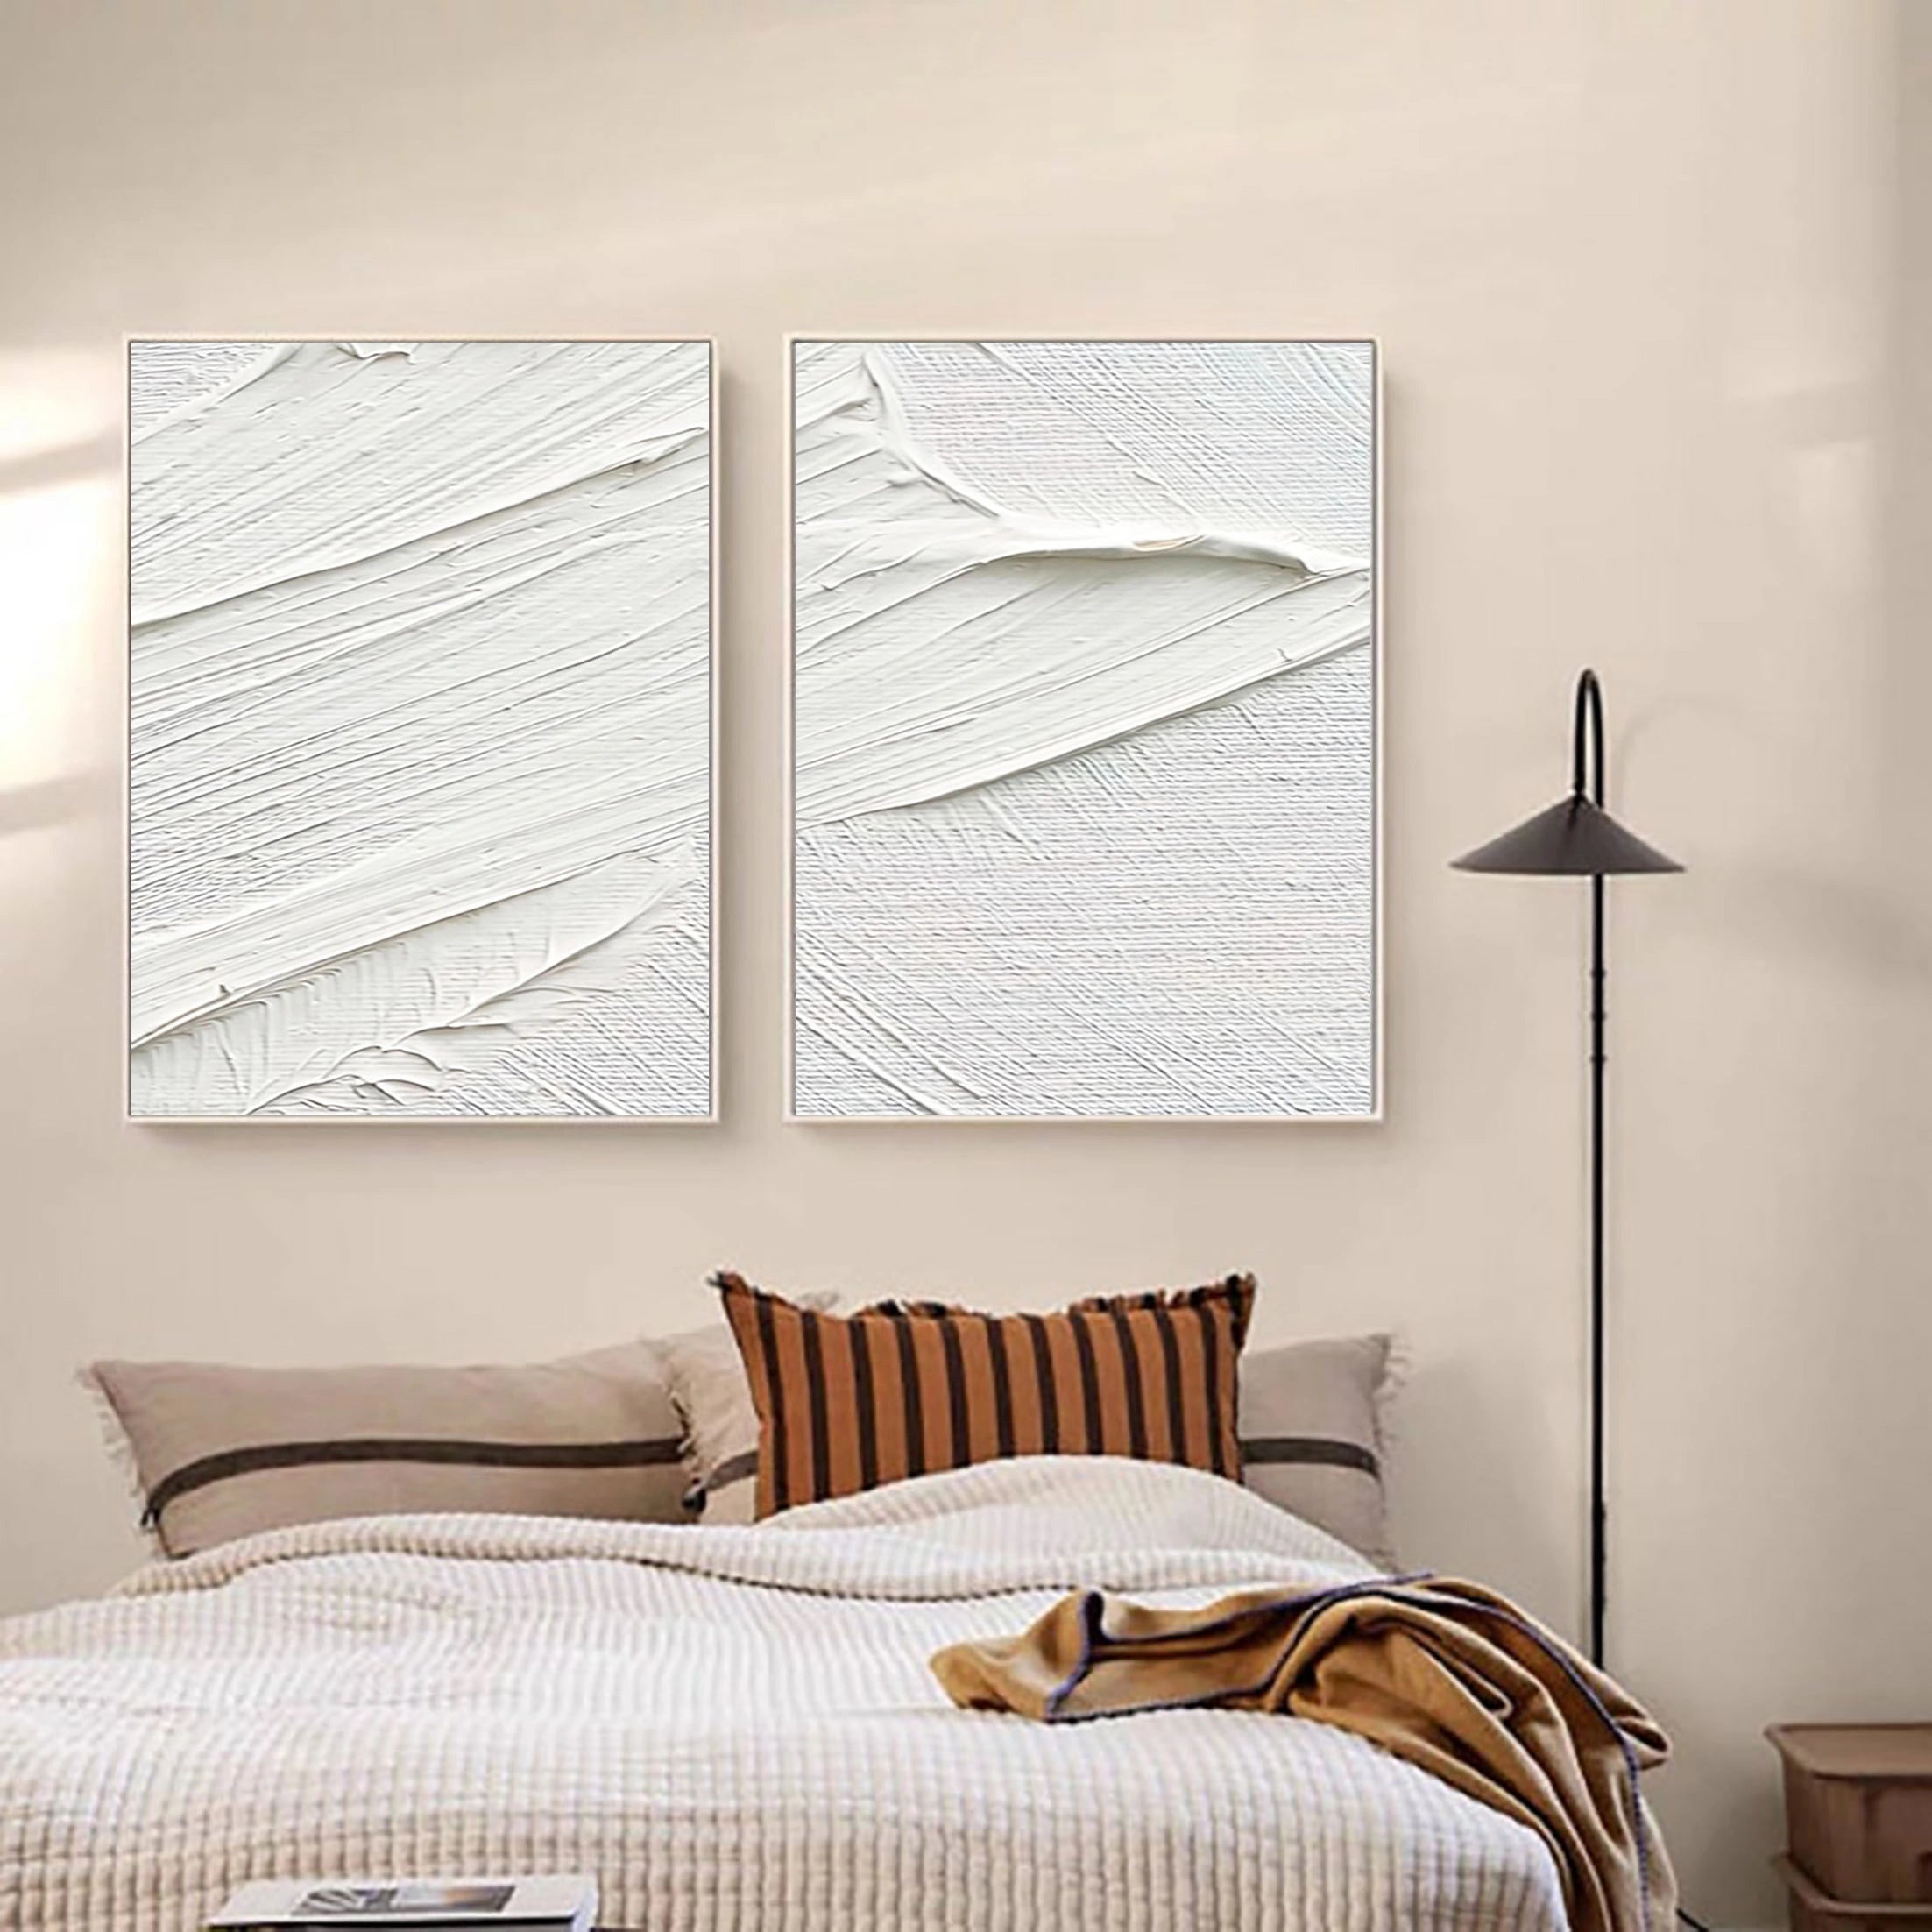 Set of 2 White Plaster Art Textured Painting on Canvas Wall Decor